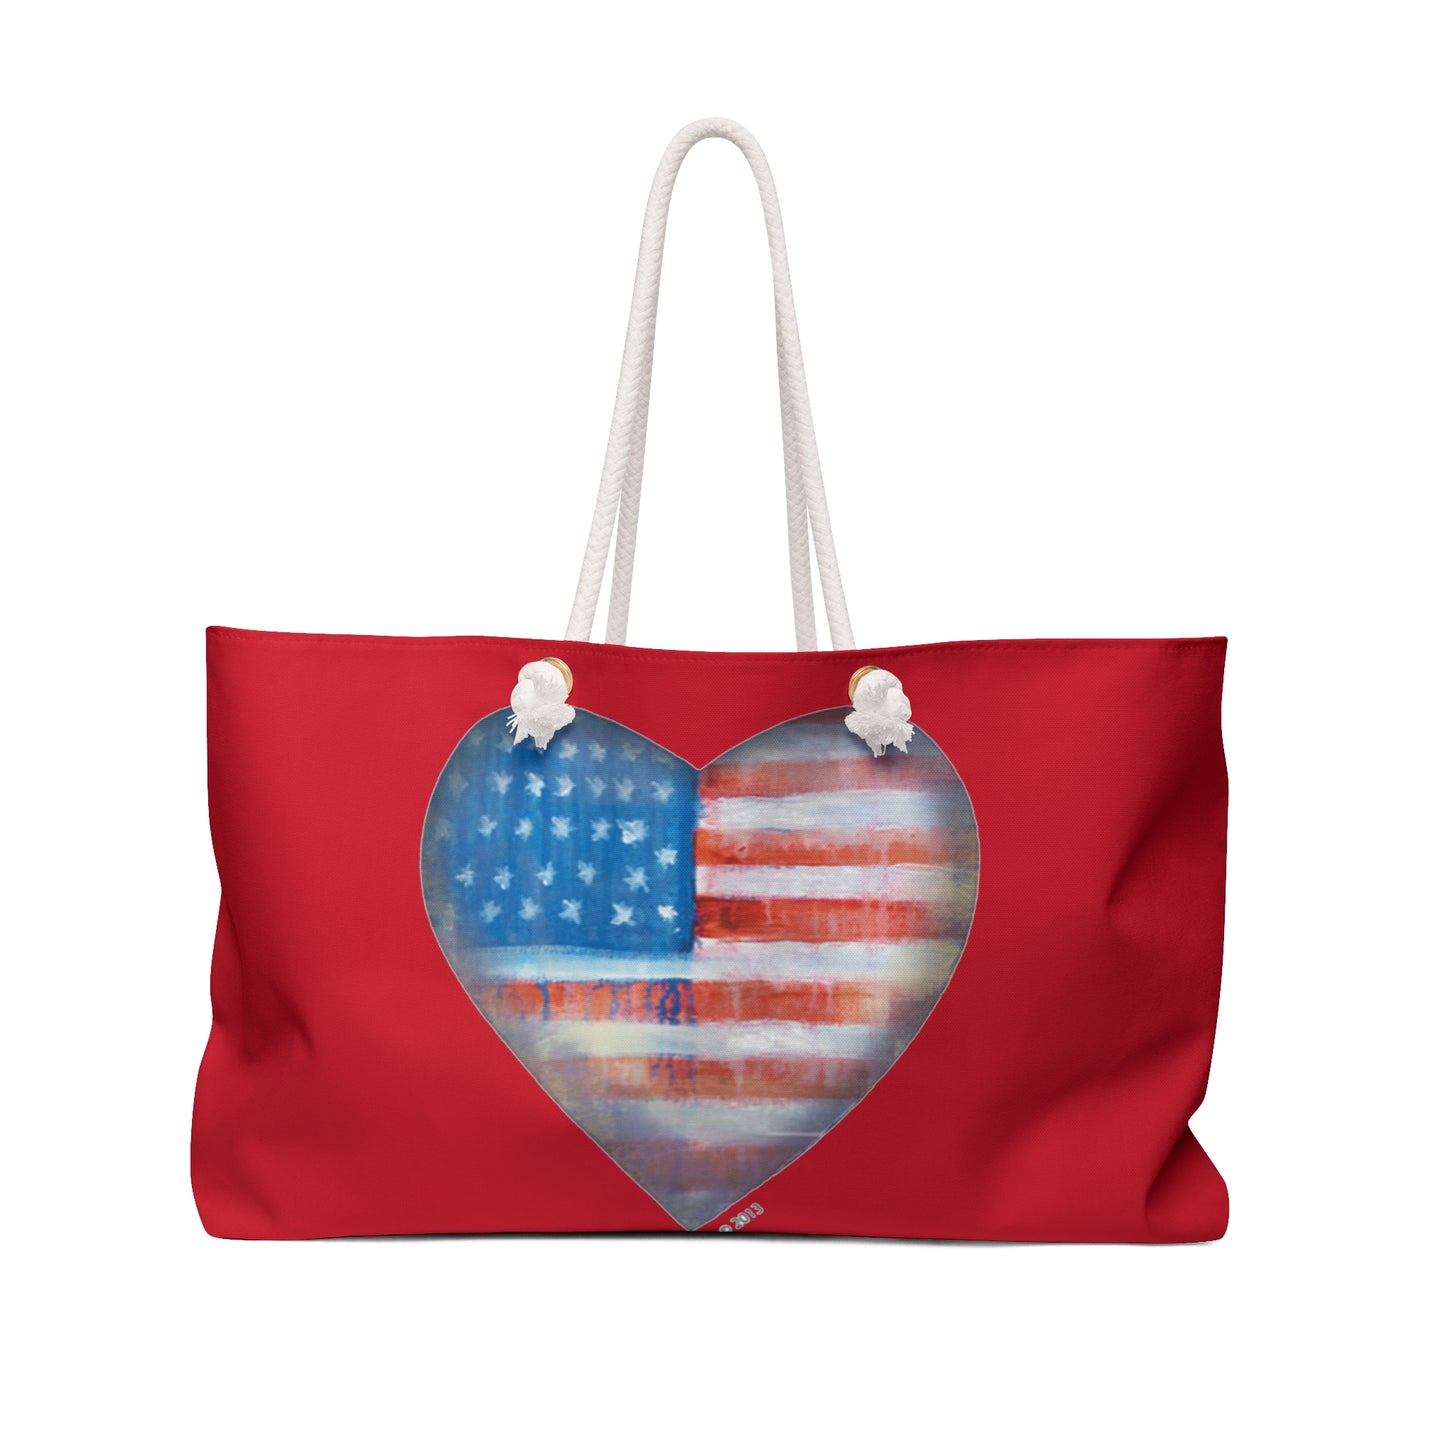 Red Tote Bag with American Heart